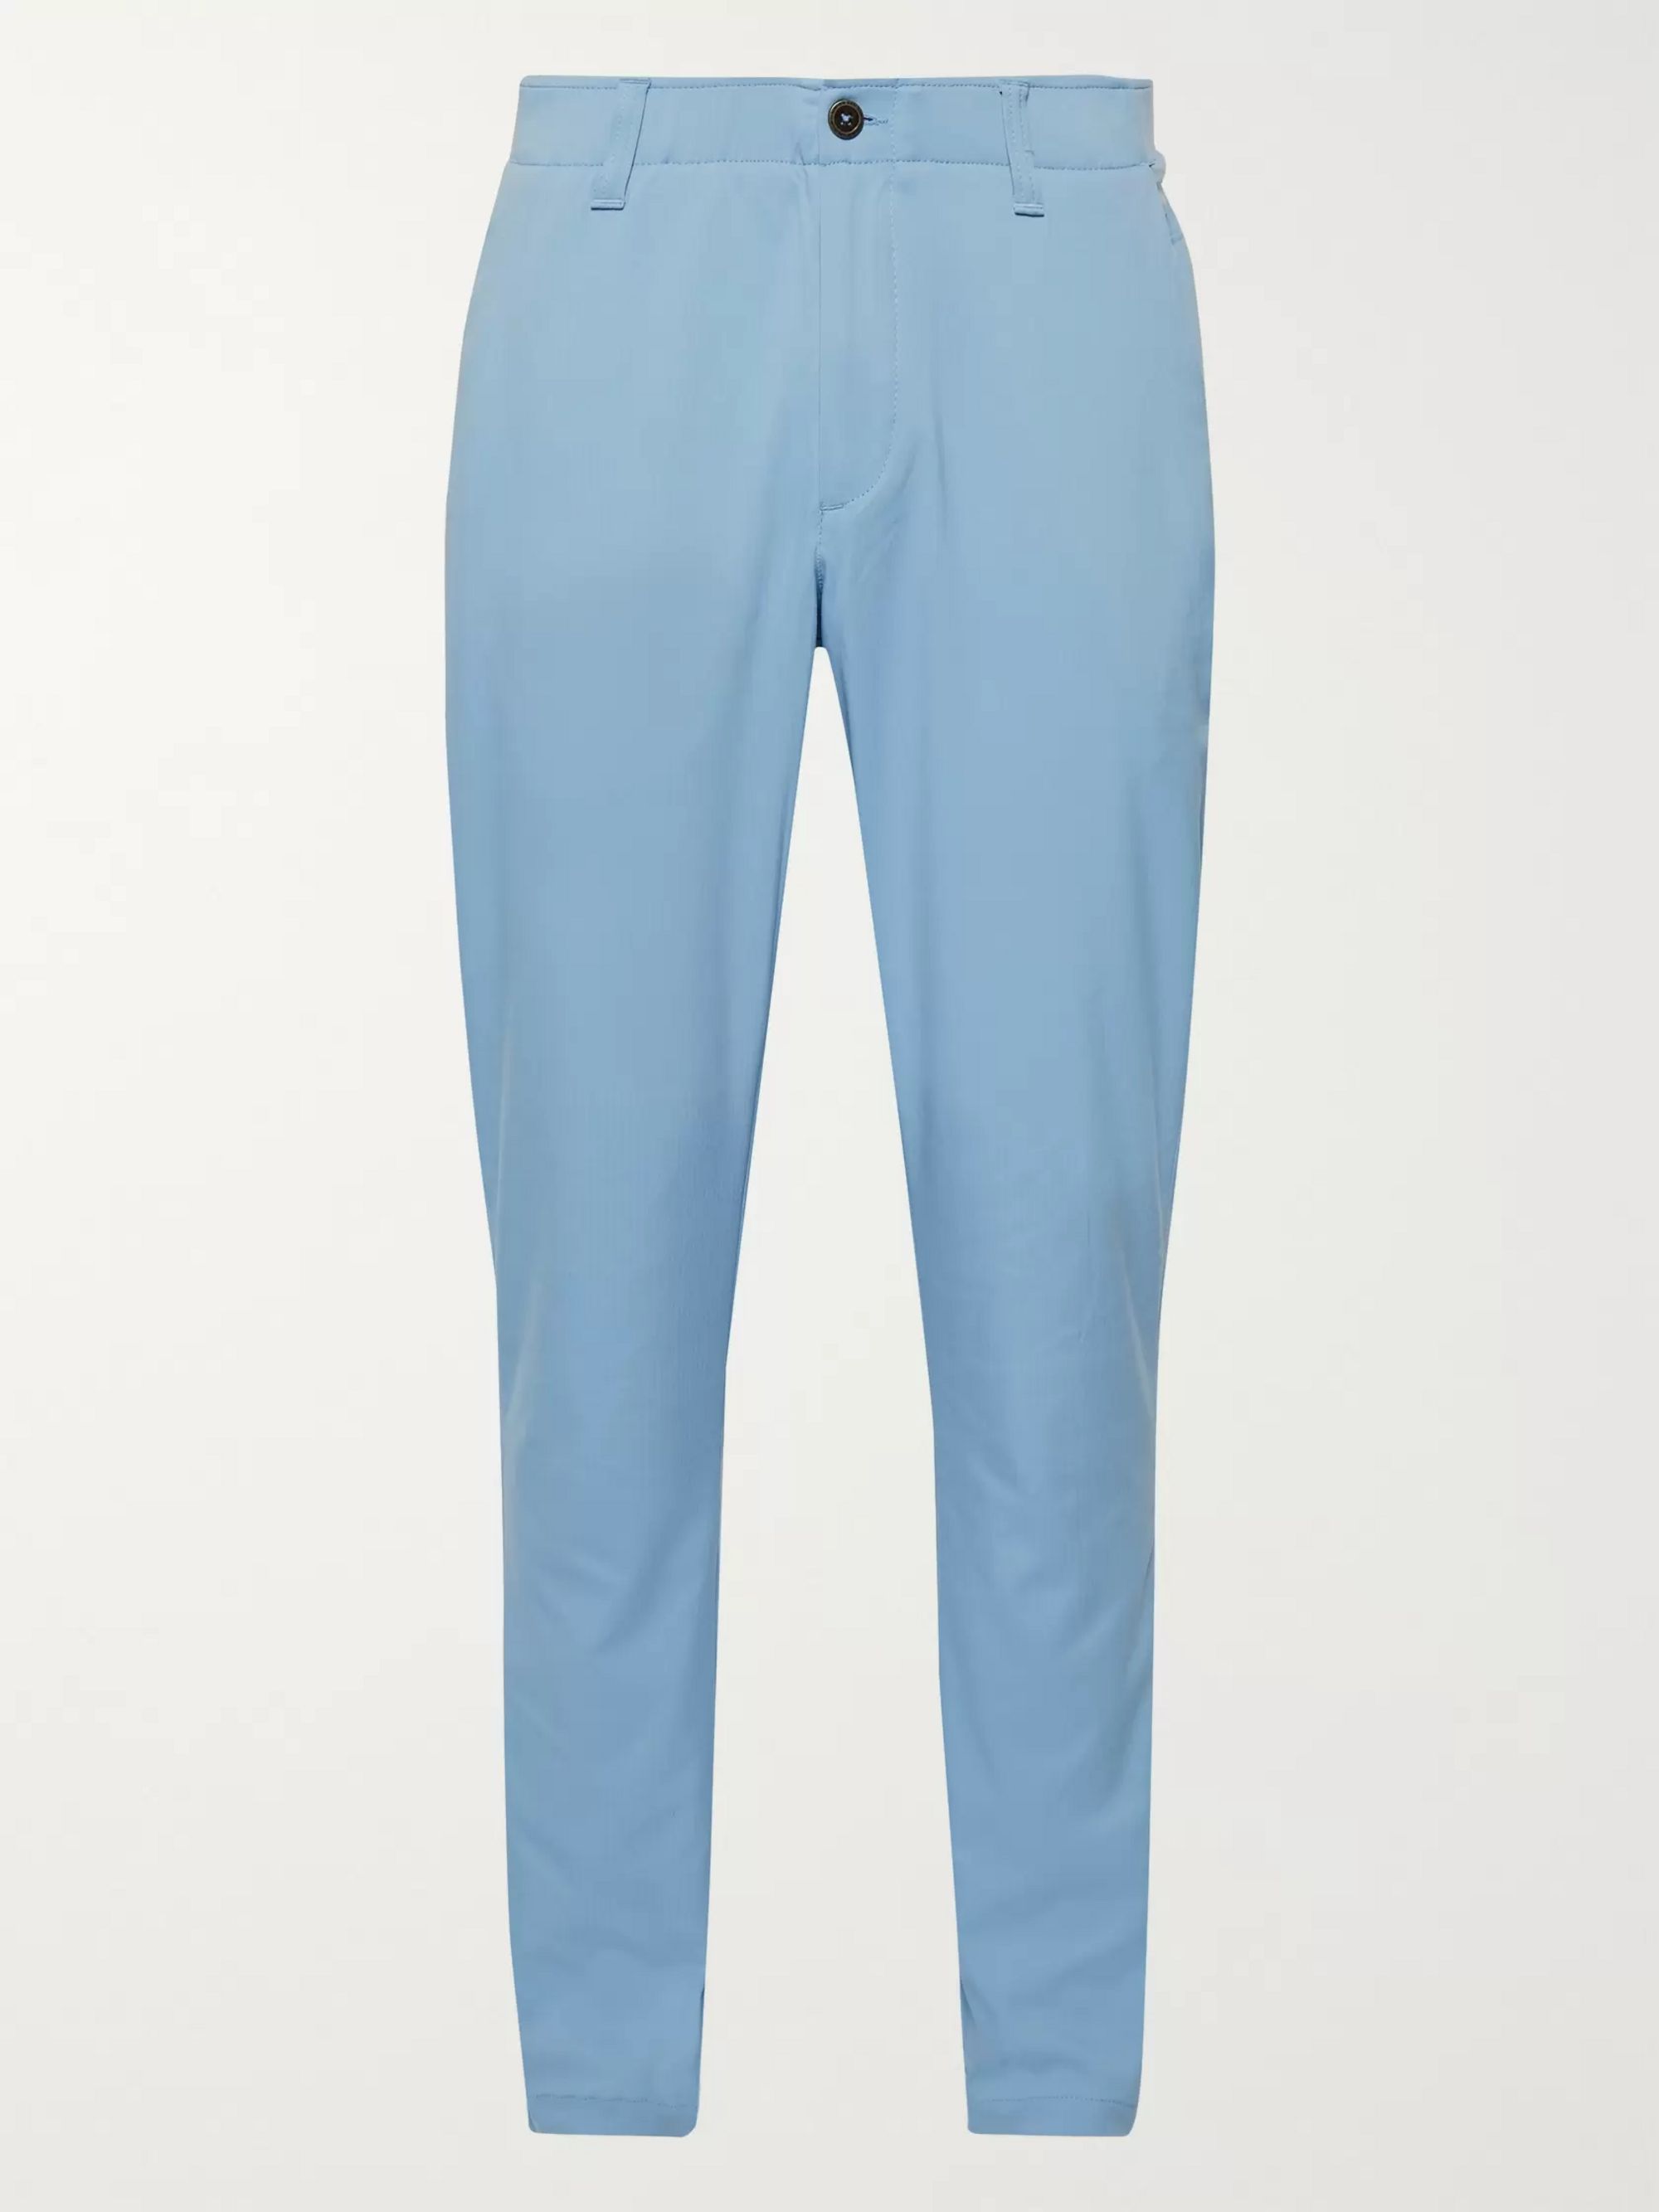 under armour golf trousers slim fit